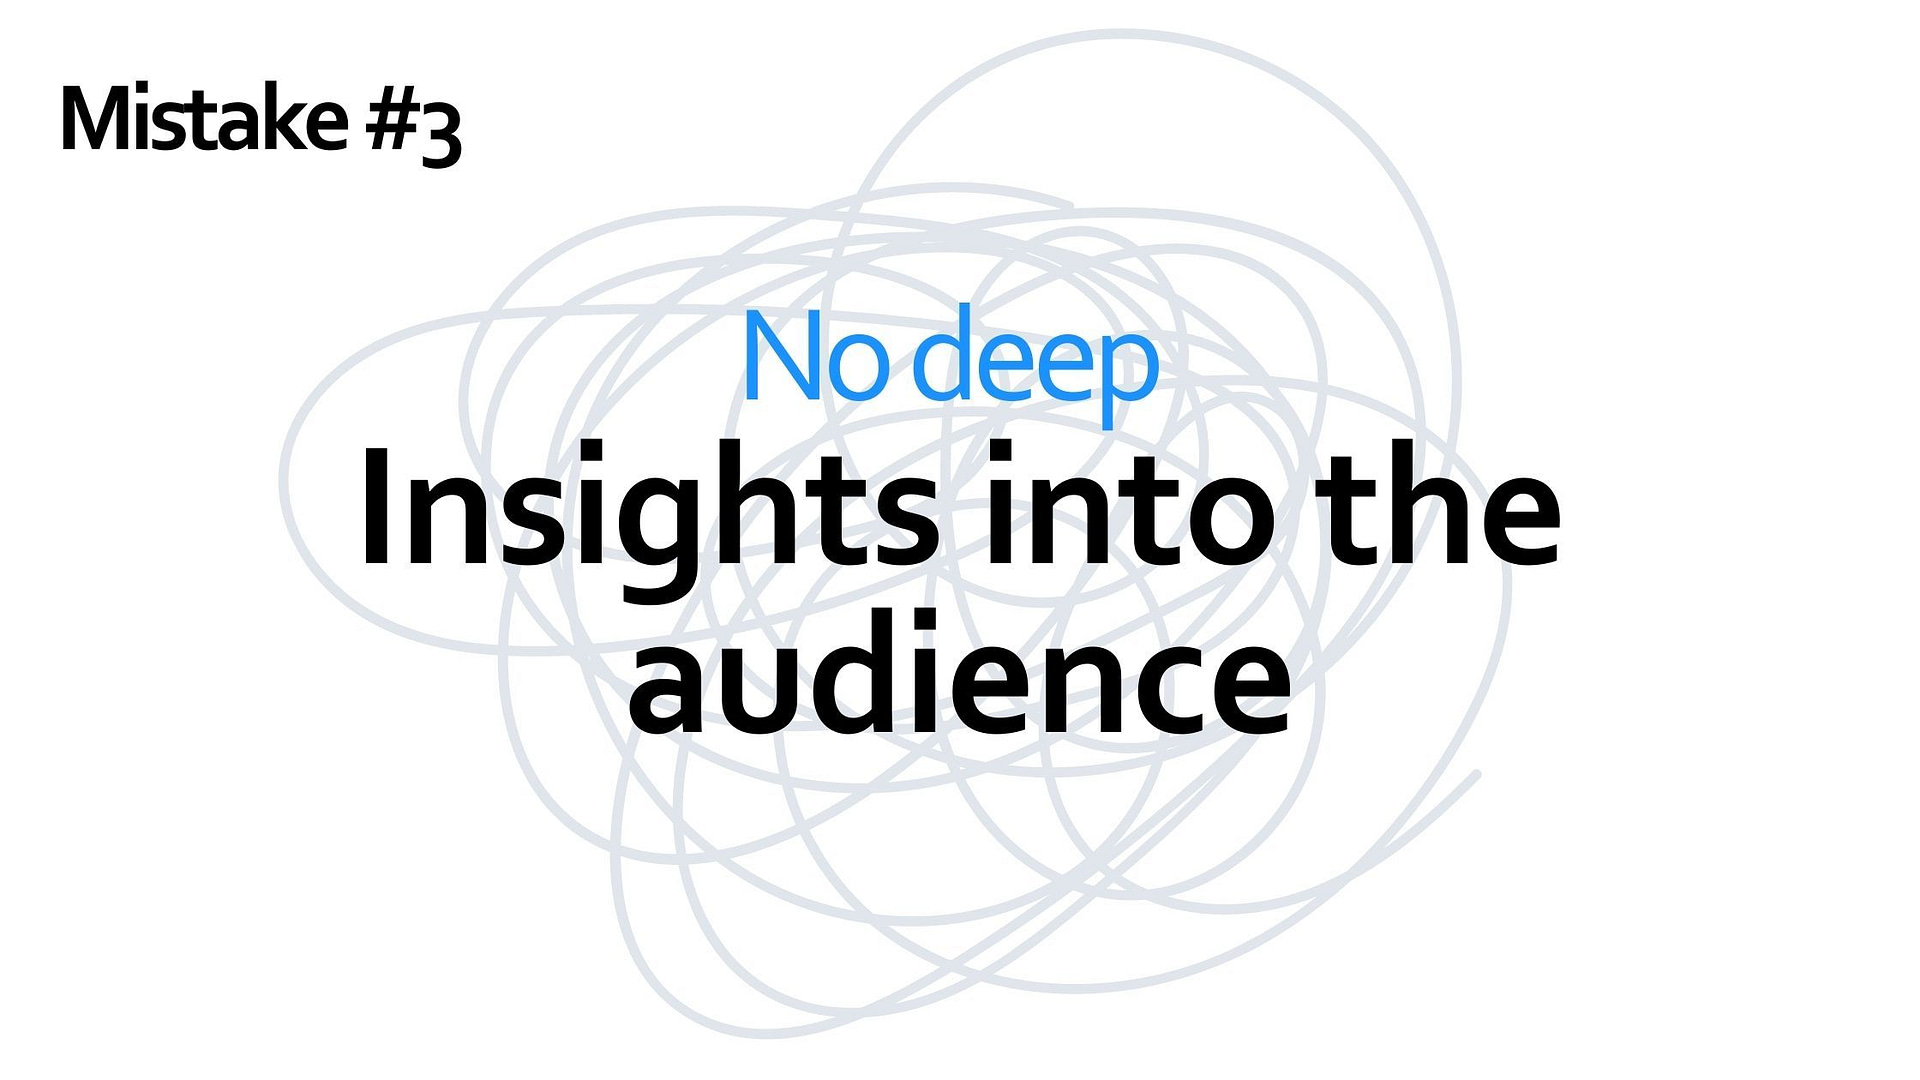 Mistake #3 - no deep insights into the audience